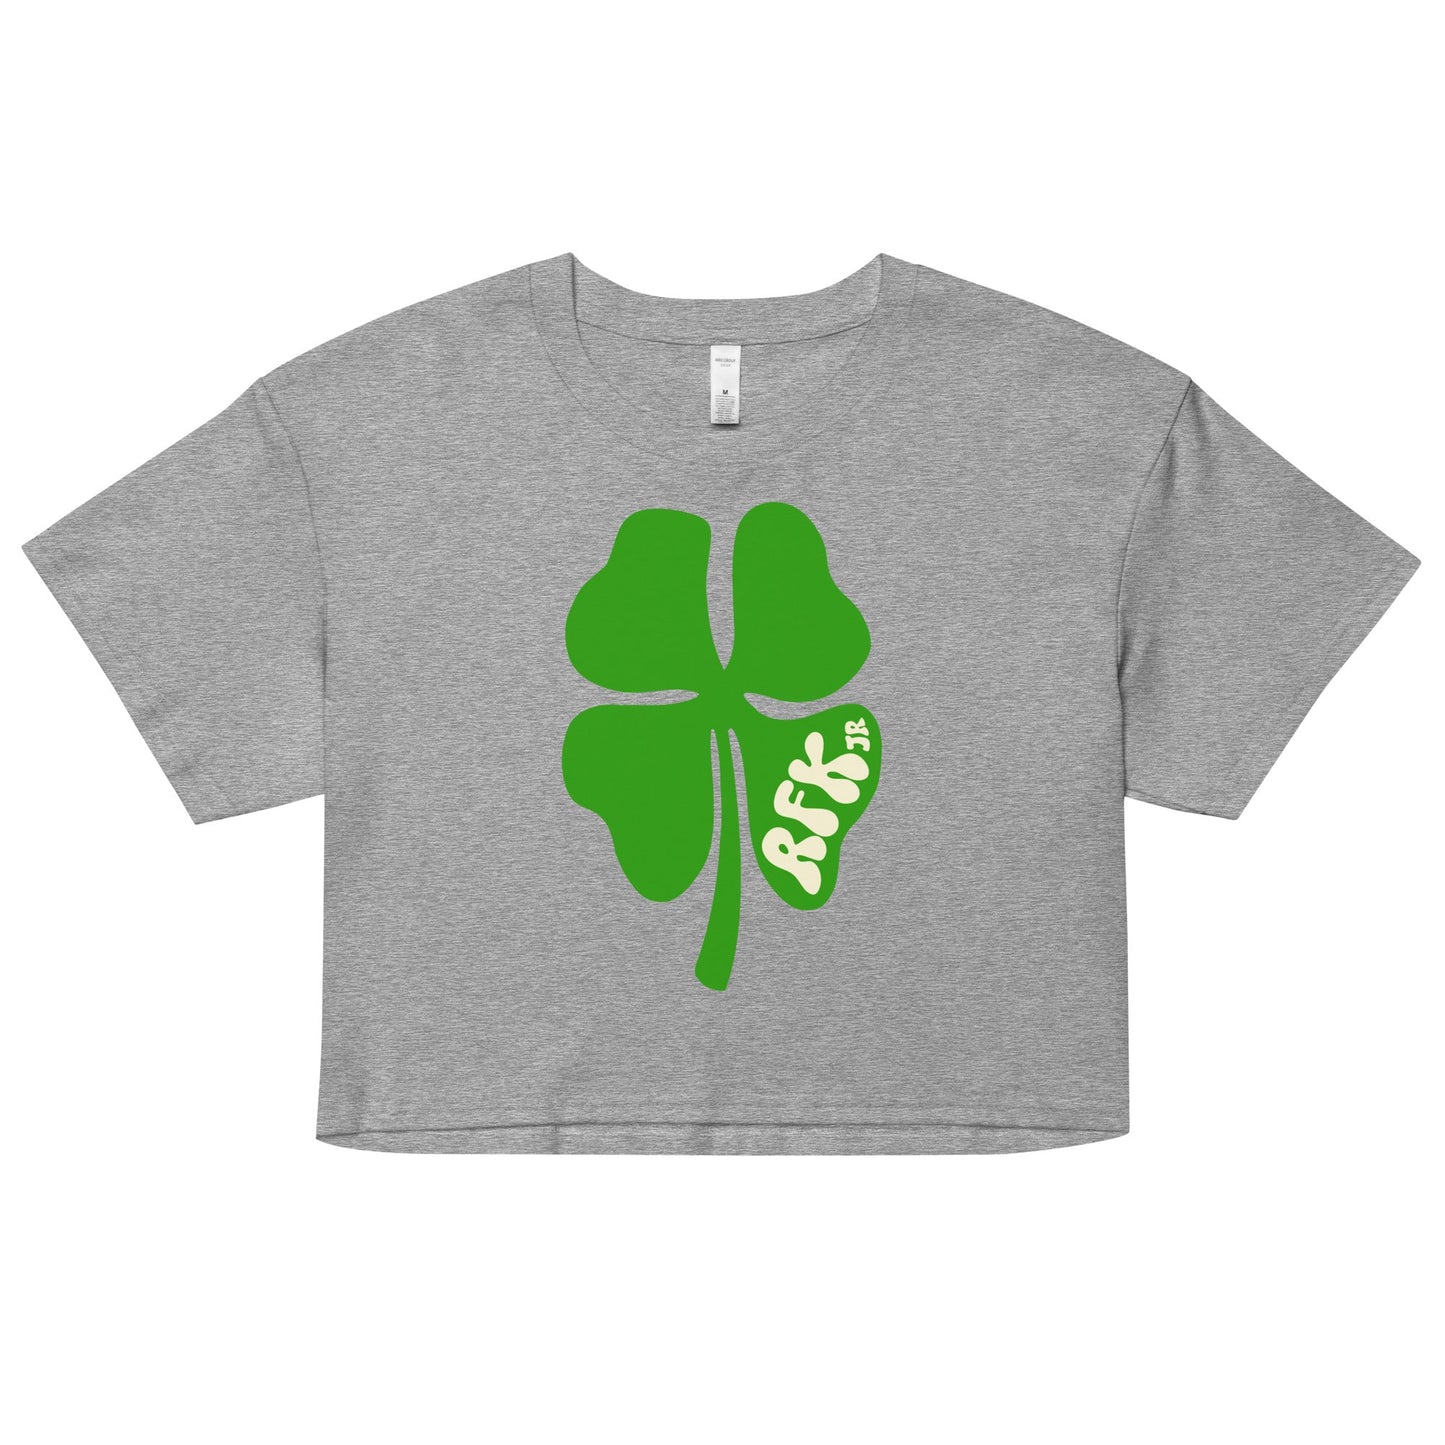 RFK Jr. Clover Women’s Crop Top - TEAM KENNEDY. All rights reserved